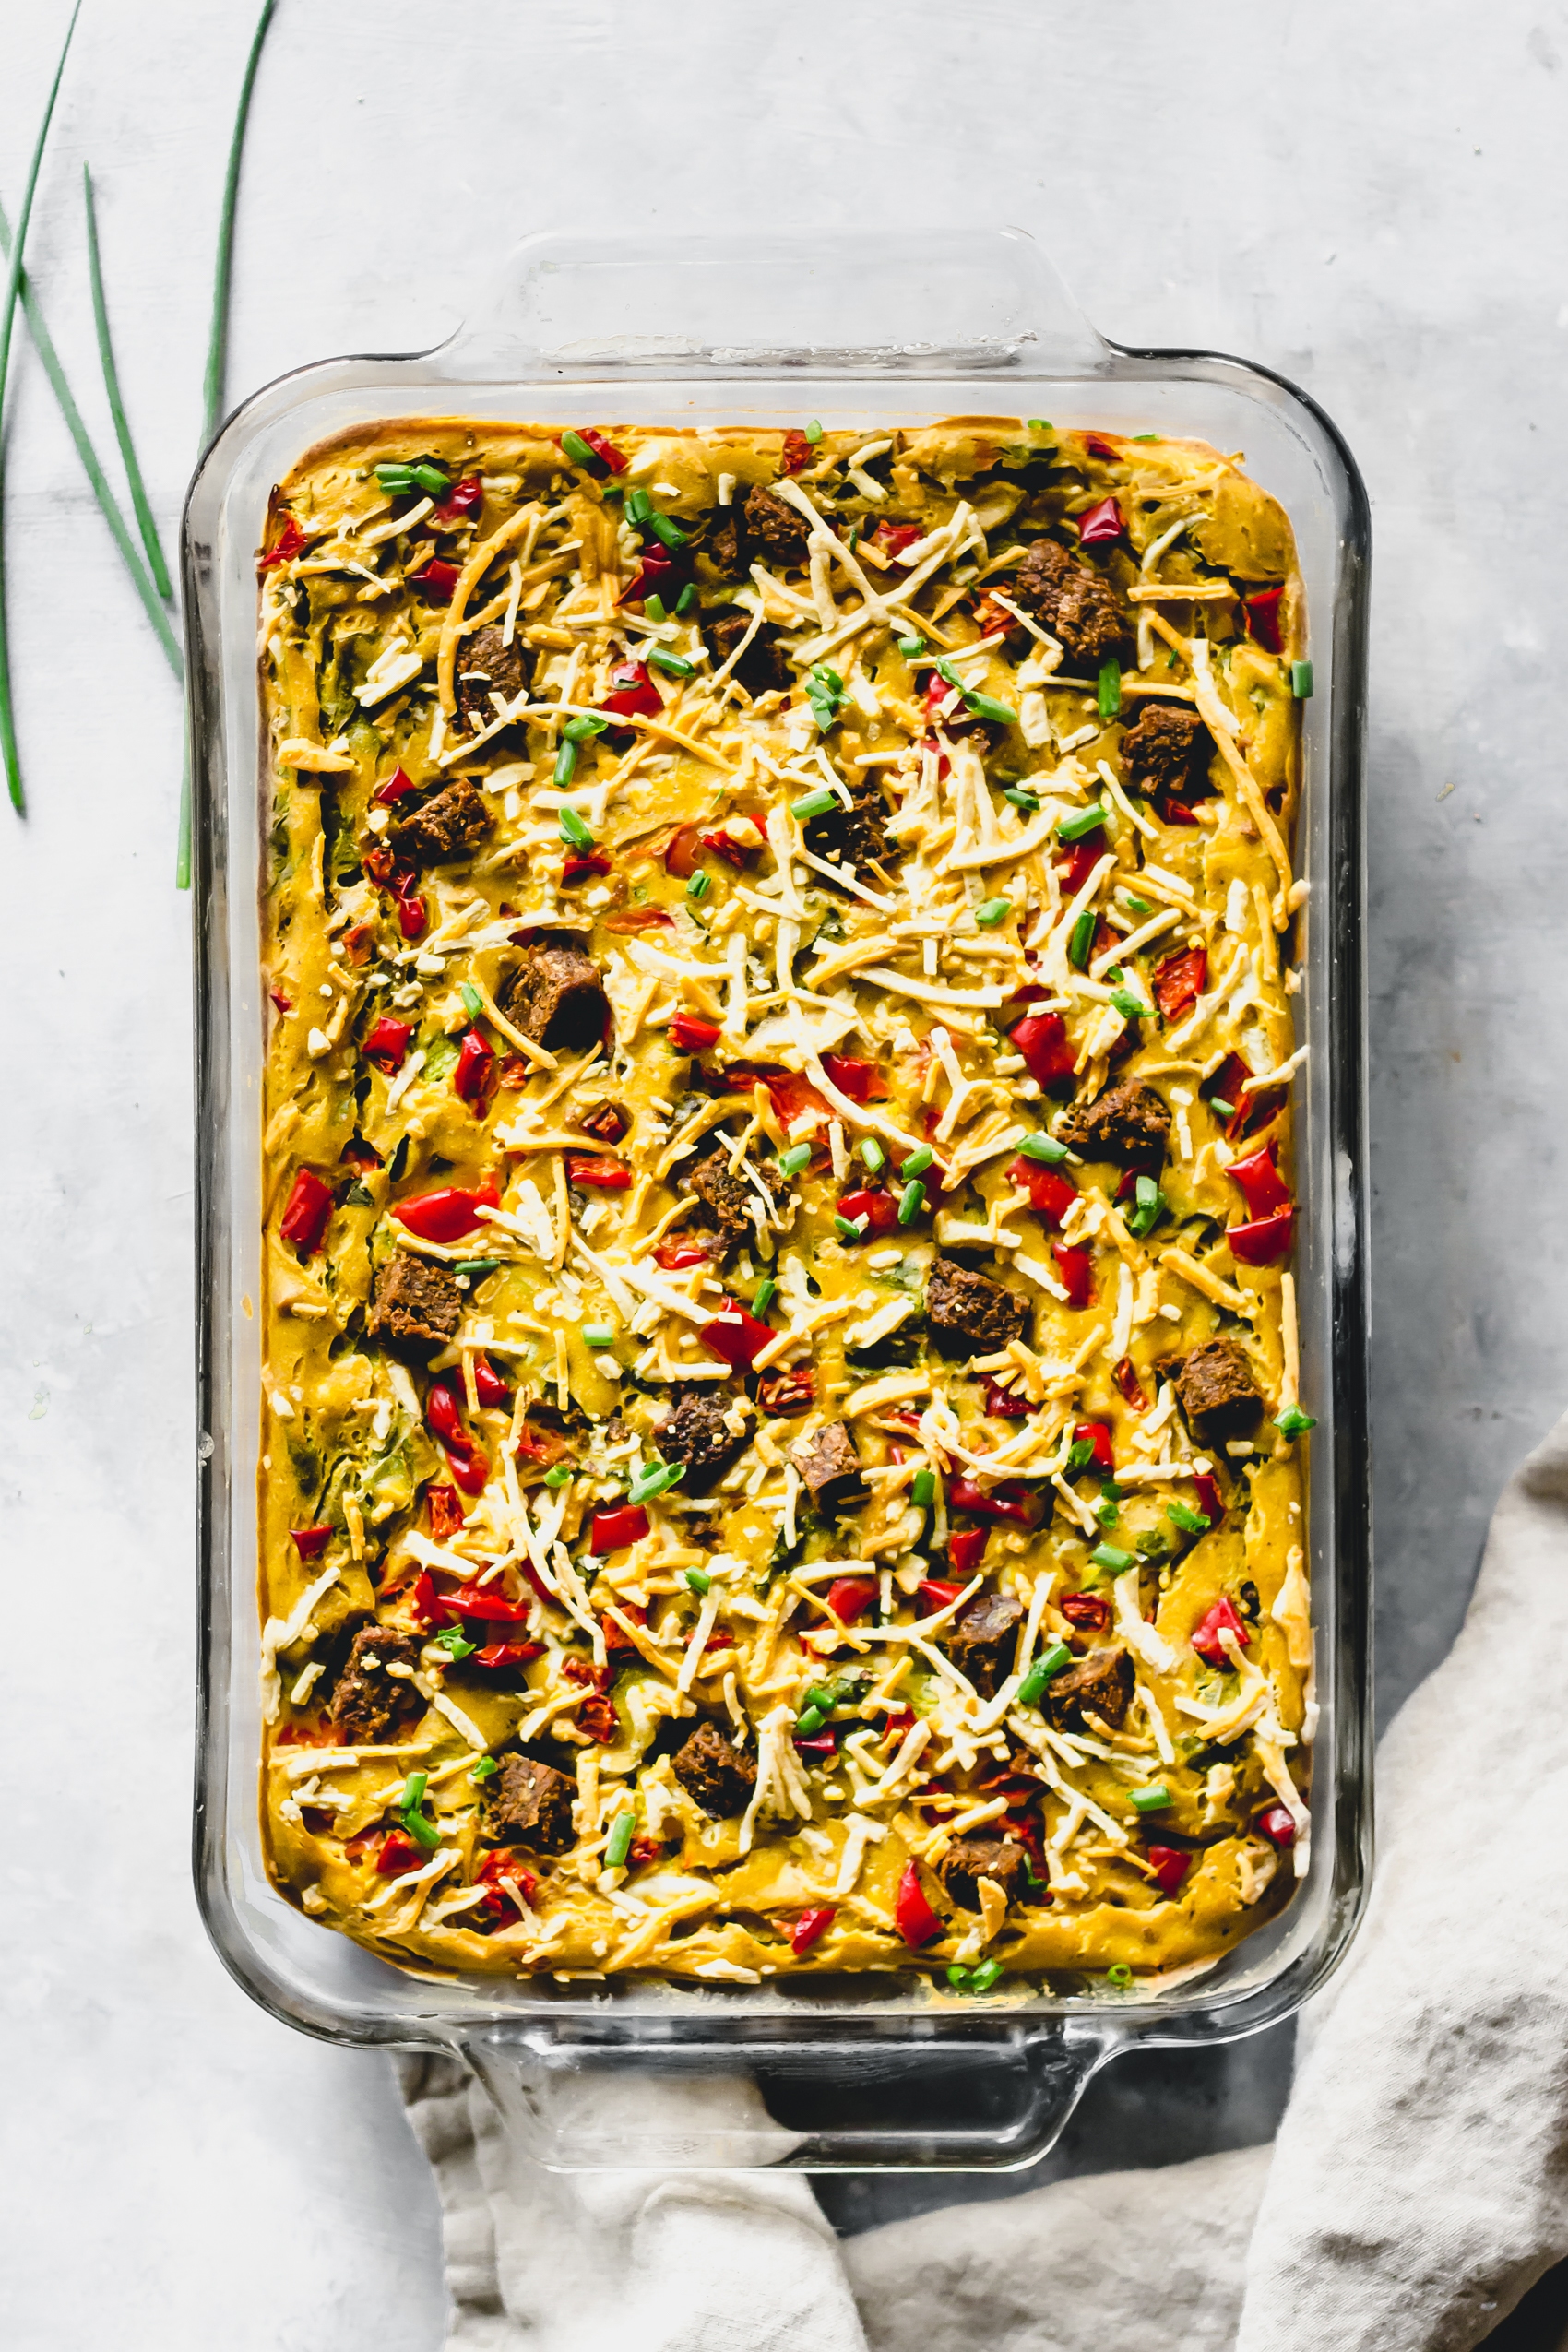 a casserole dish filled with a vegan egg casserole topped with shredded vegan cheese